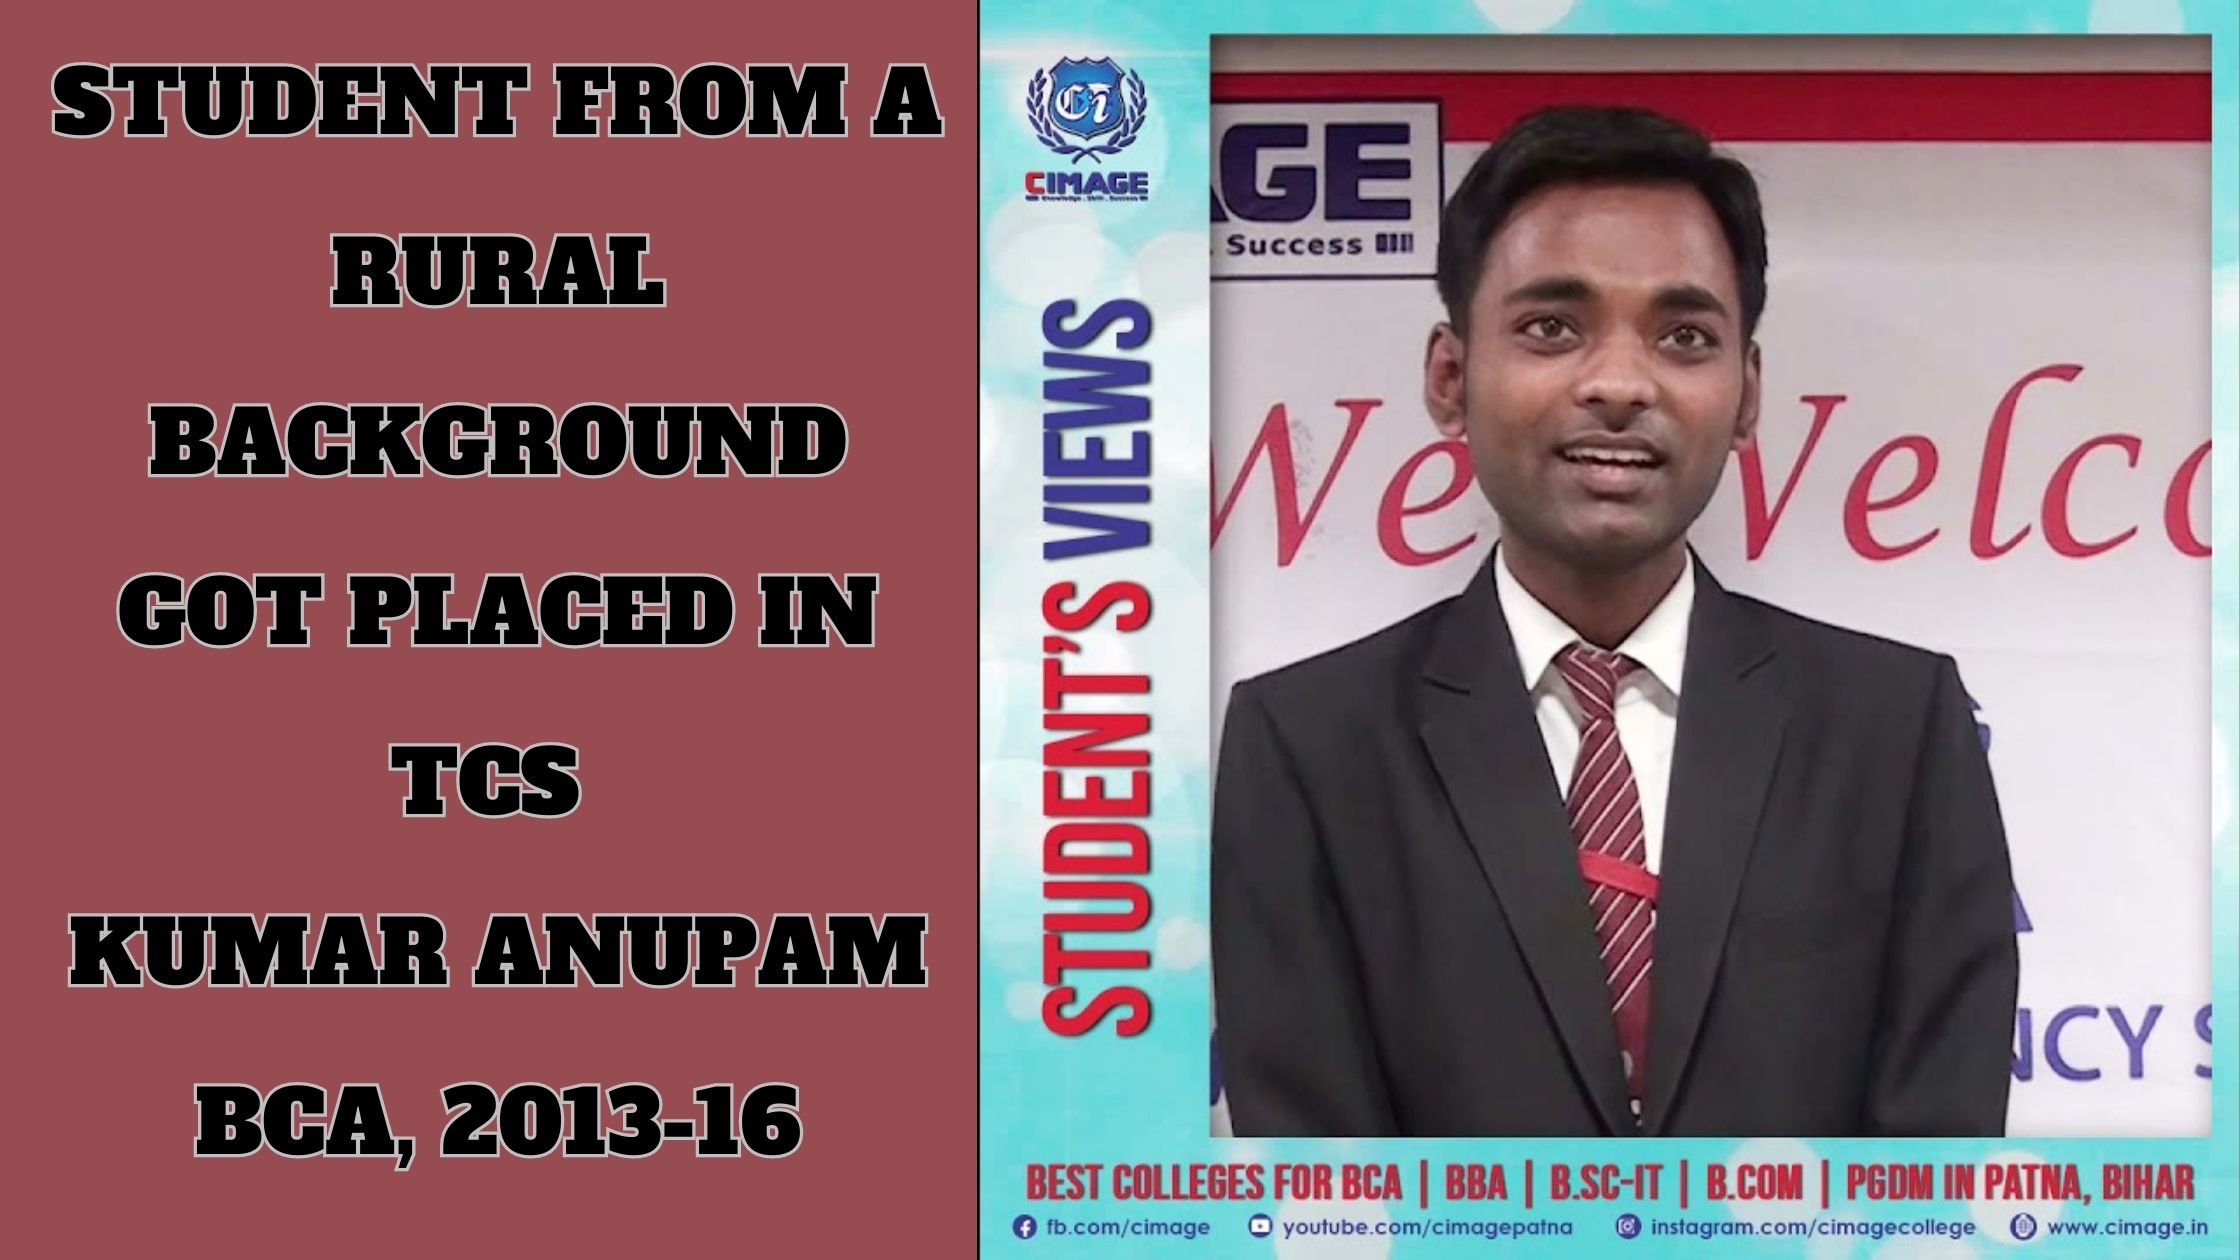 Student From A Rural Background of CIMAGE College got Placed In TCS>